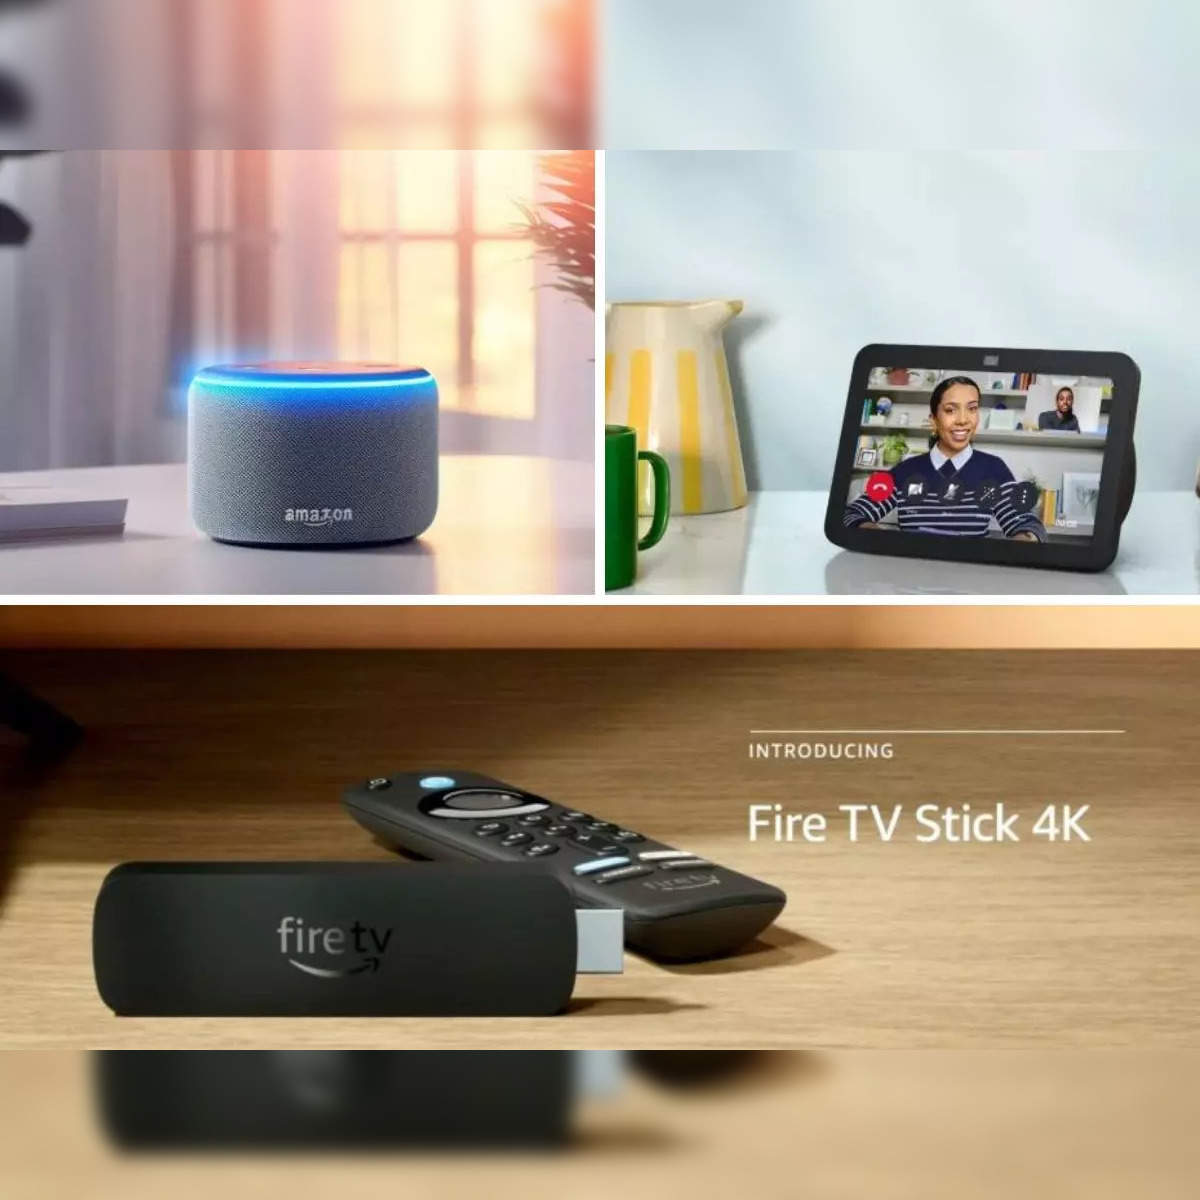 Launch event 2023:  Fall 2023 Launch Event: Ahead of festive  season, new AI-compatible Alexa, Echo Show 8 unveiled; check details - The  Economic Times